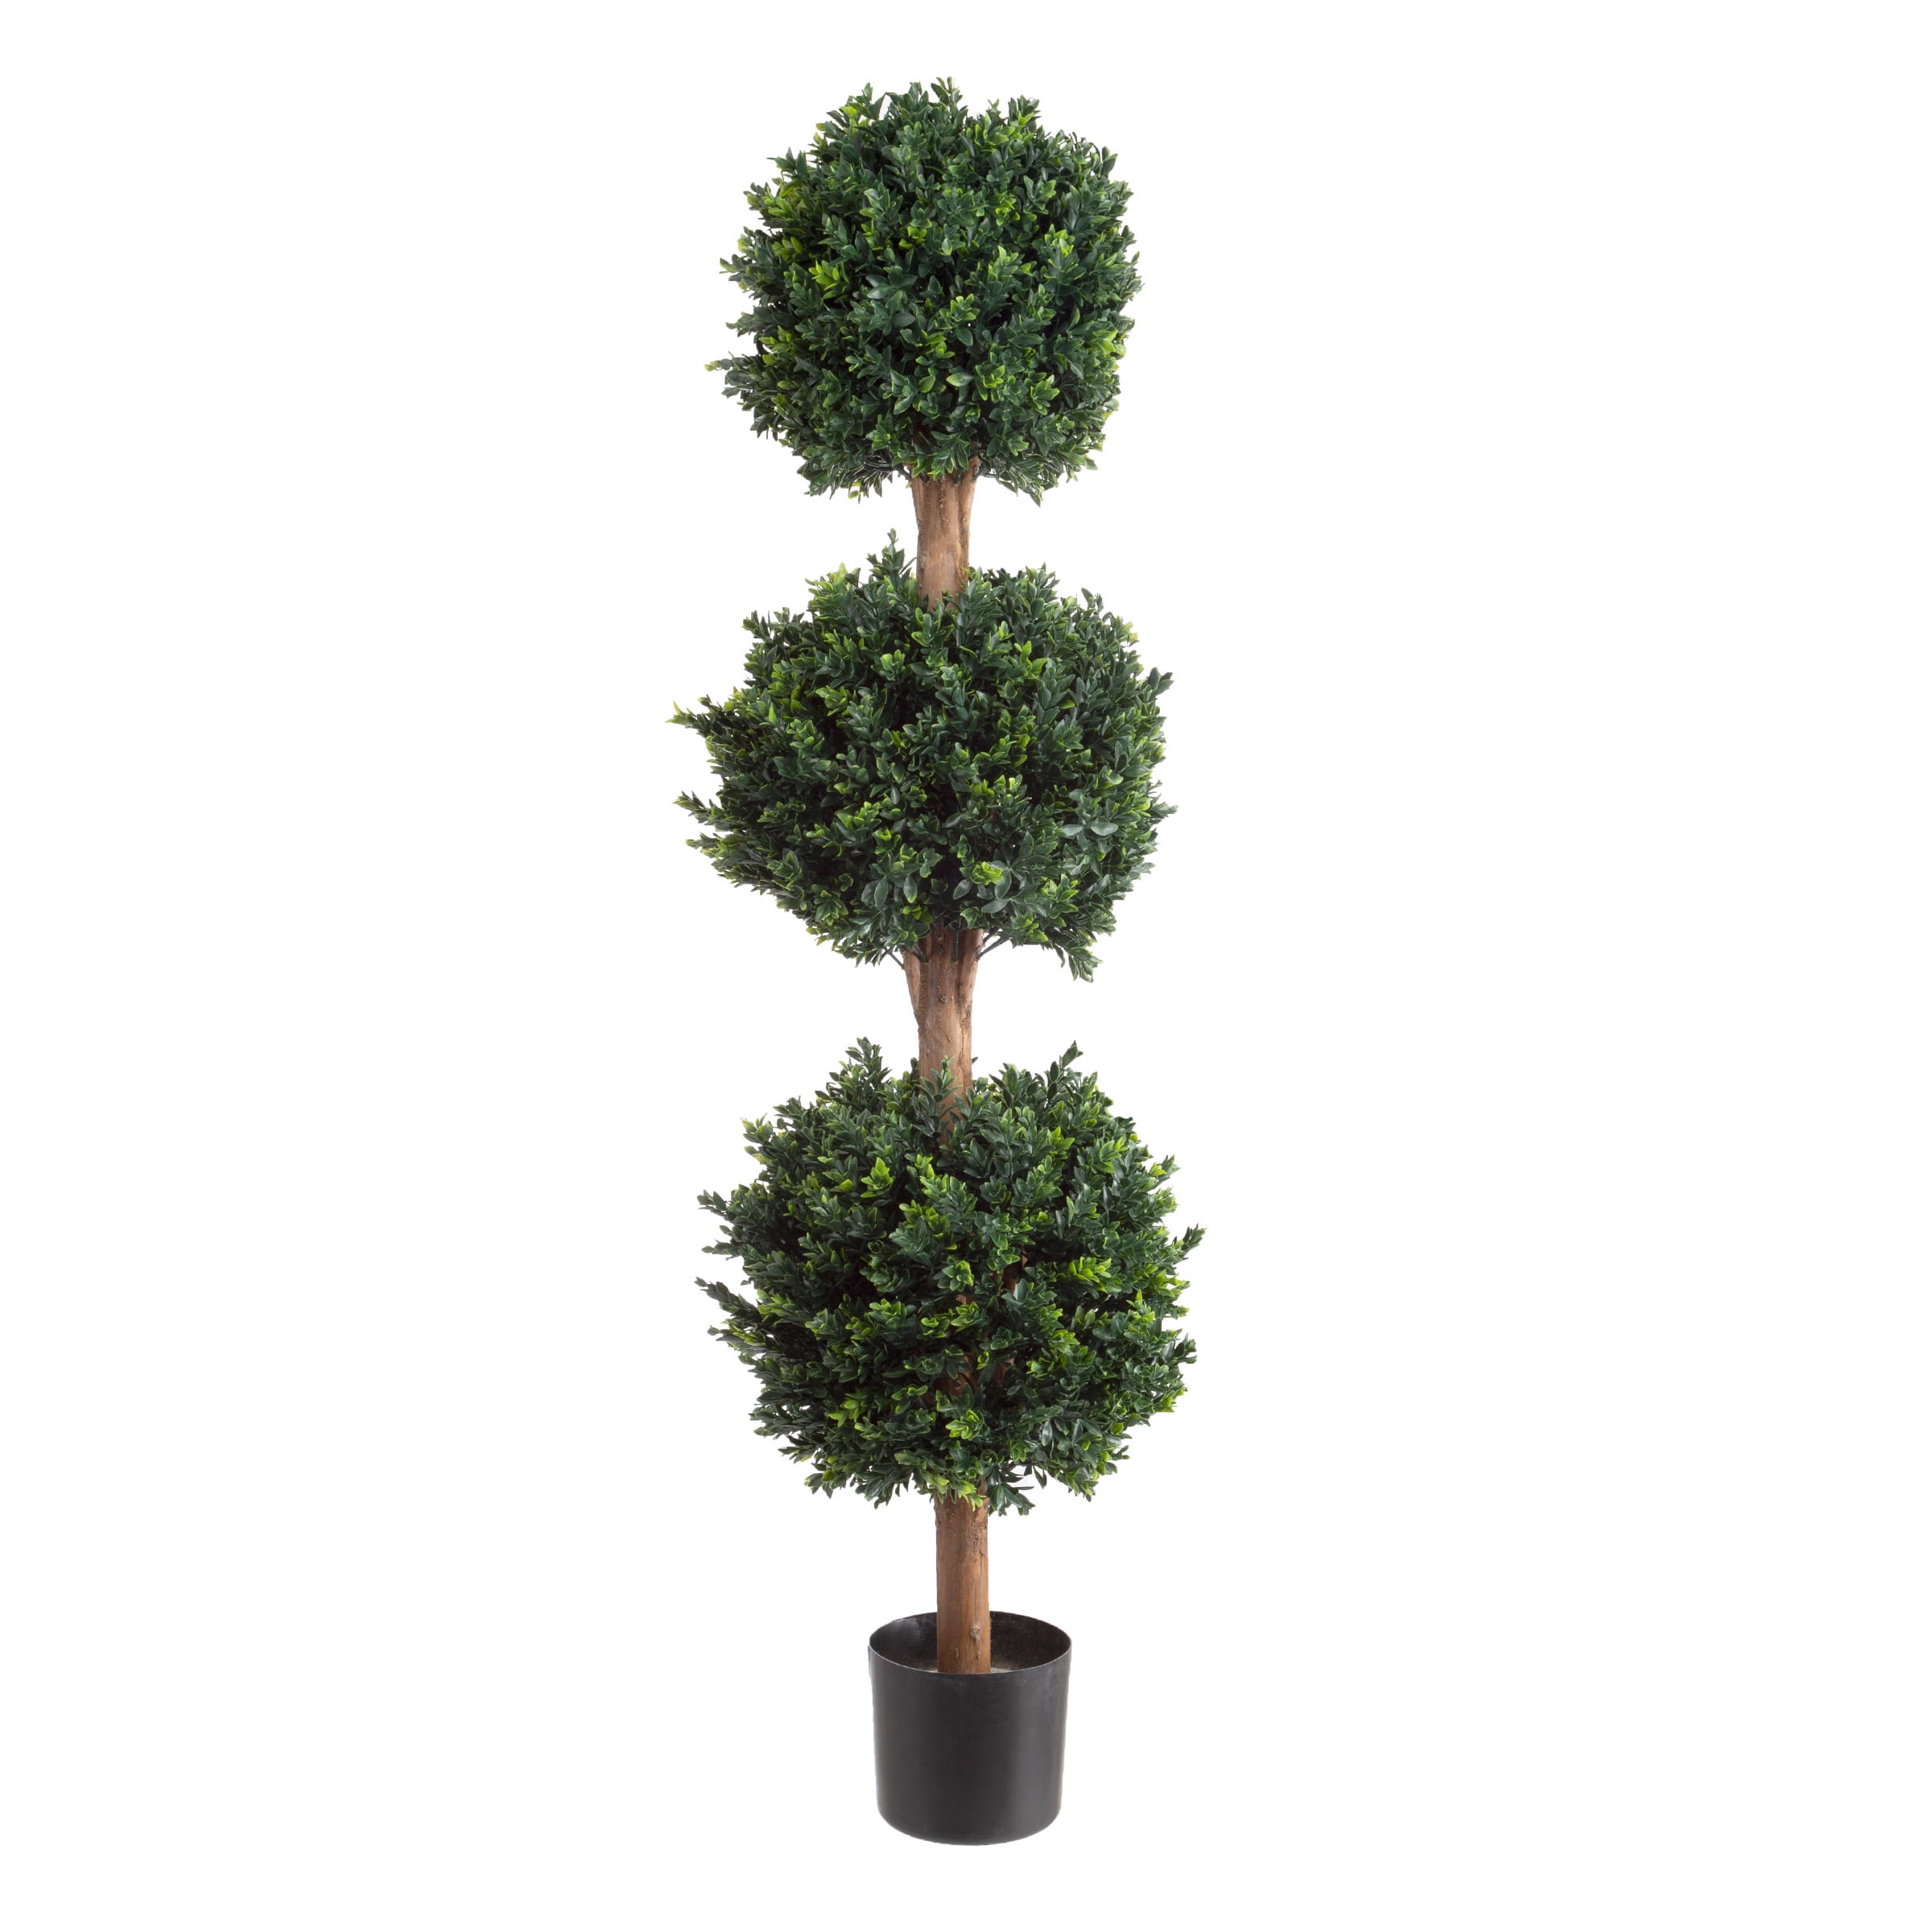 UV Protected Indoor and Outdoor Use Artificial 4ft Boxwood Topiary Single Ball Shape Tree Plant Lollipop Shape Tree